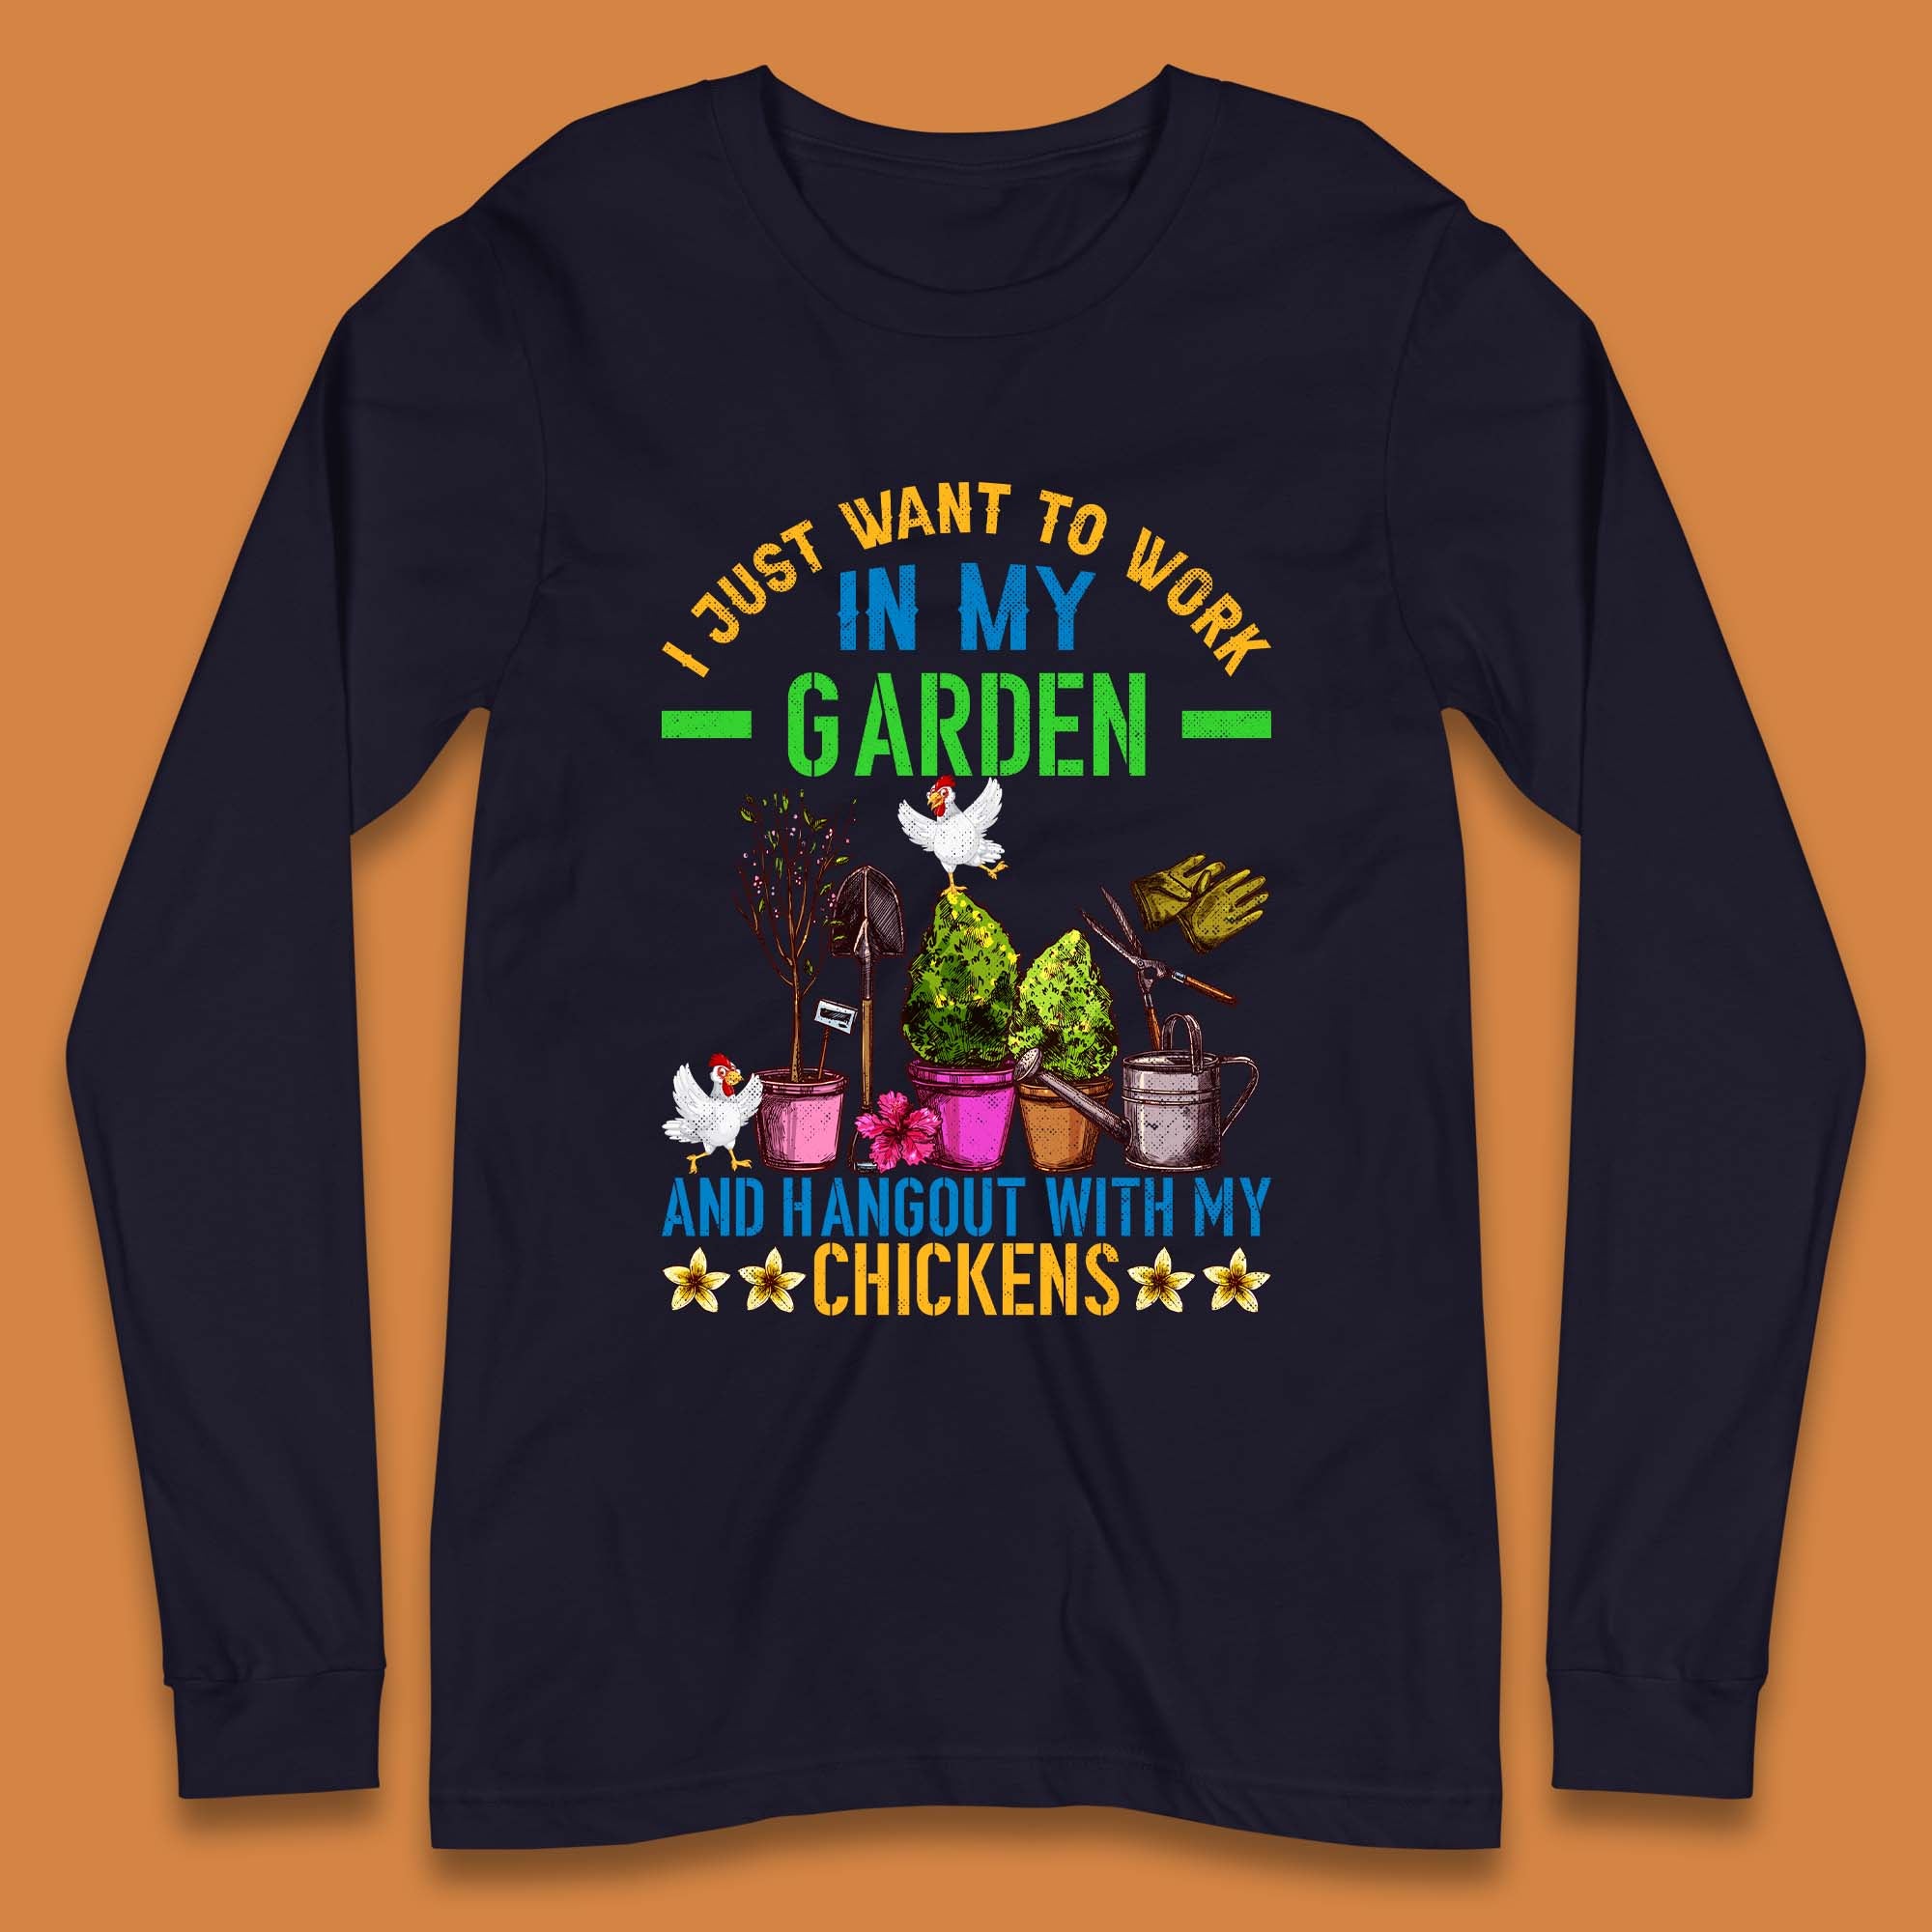 Hangout With My Chickens Long Sleeve T-Shirt